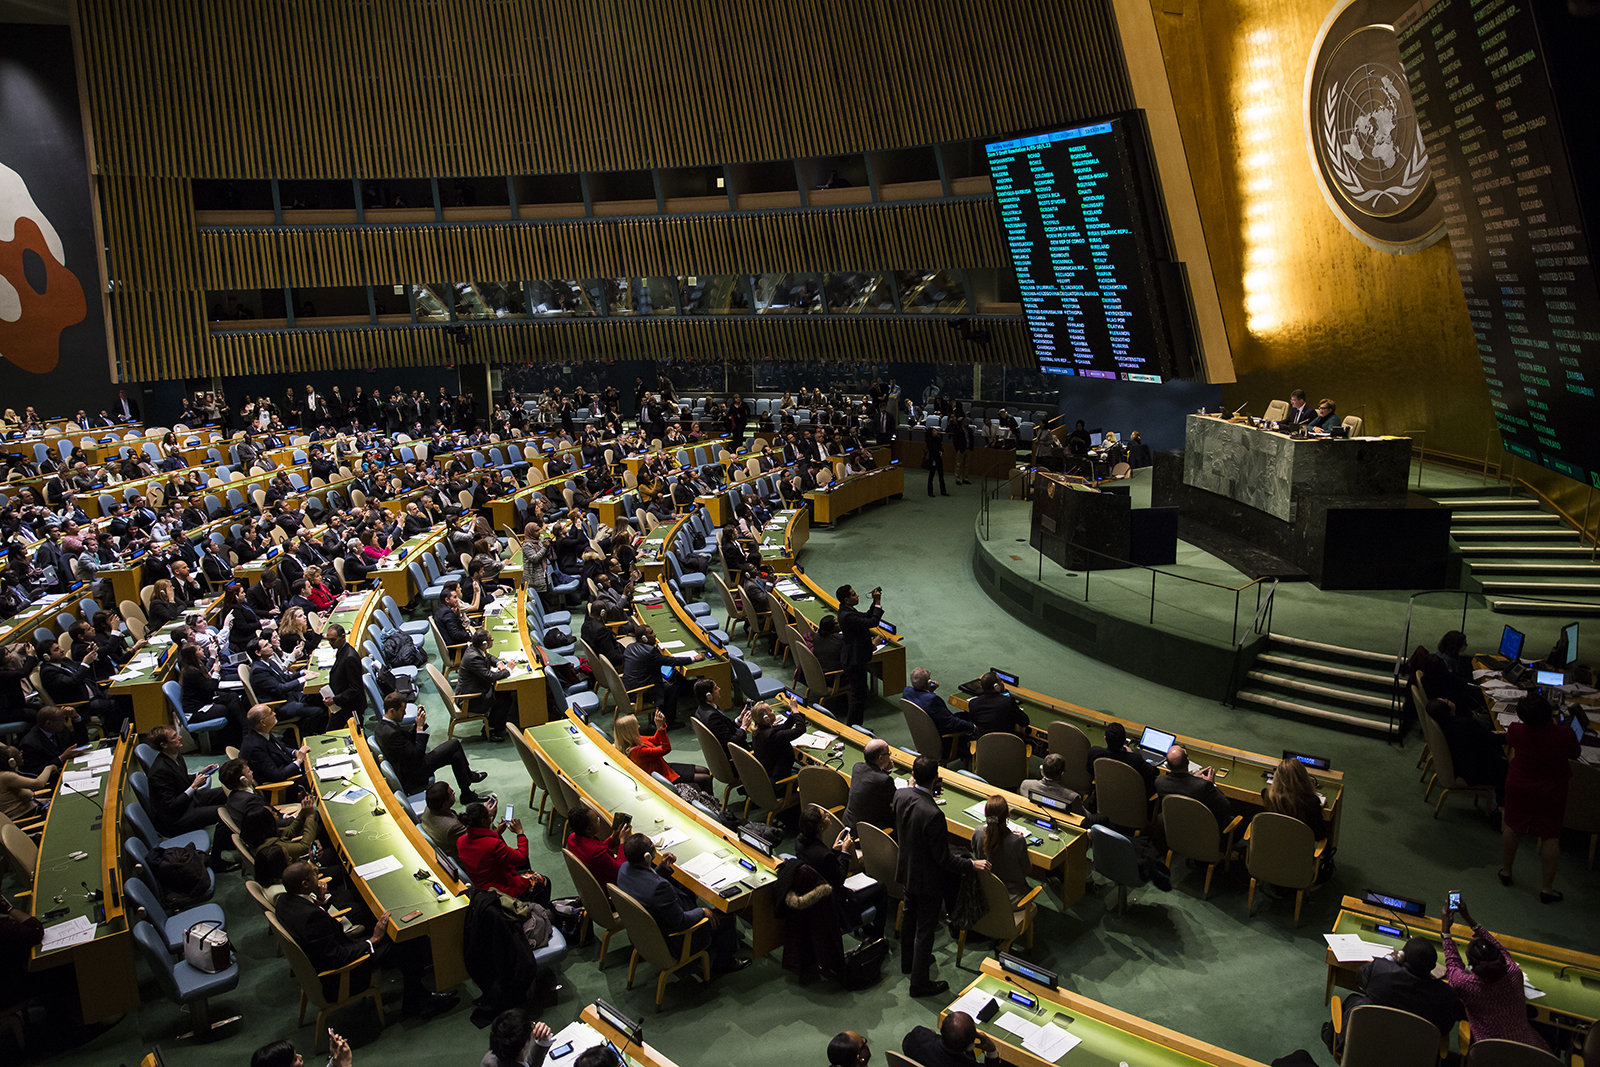 Voting at an emergency UN General Assembly meeting in New York City on Jerusalem's situation following U.S. President Donald Trump's declaration recognizing Jerusalem as the capital of Israel, December 21, 2017. (Amir Levy/Flash90)